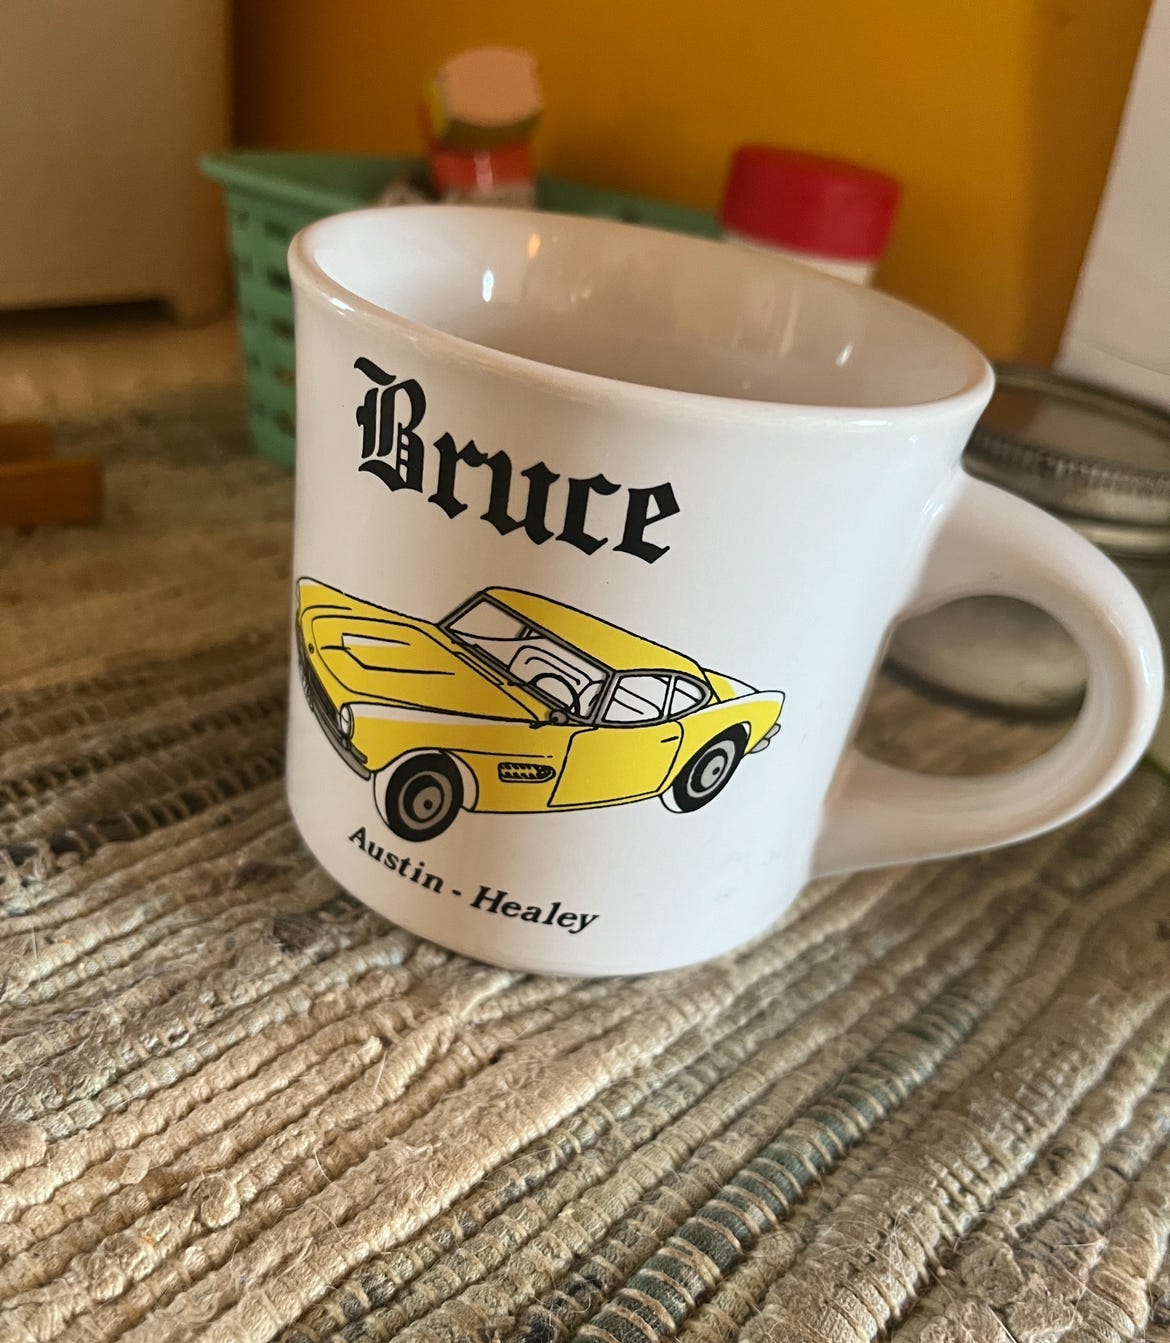 A similar mug, this one with the name "Bruce" and the image of a racecar. 